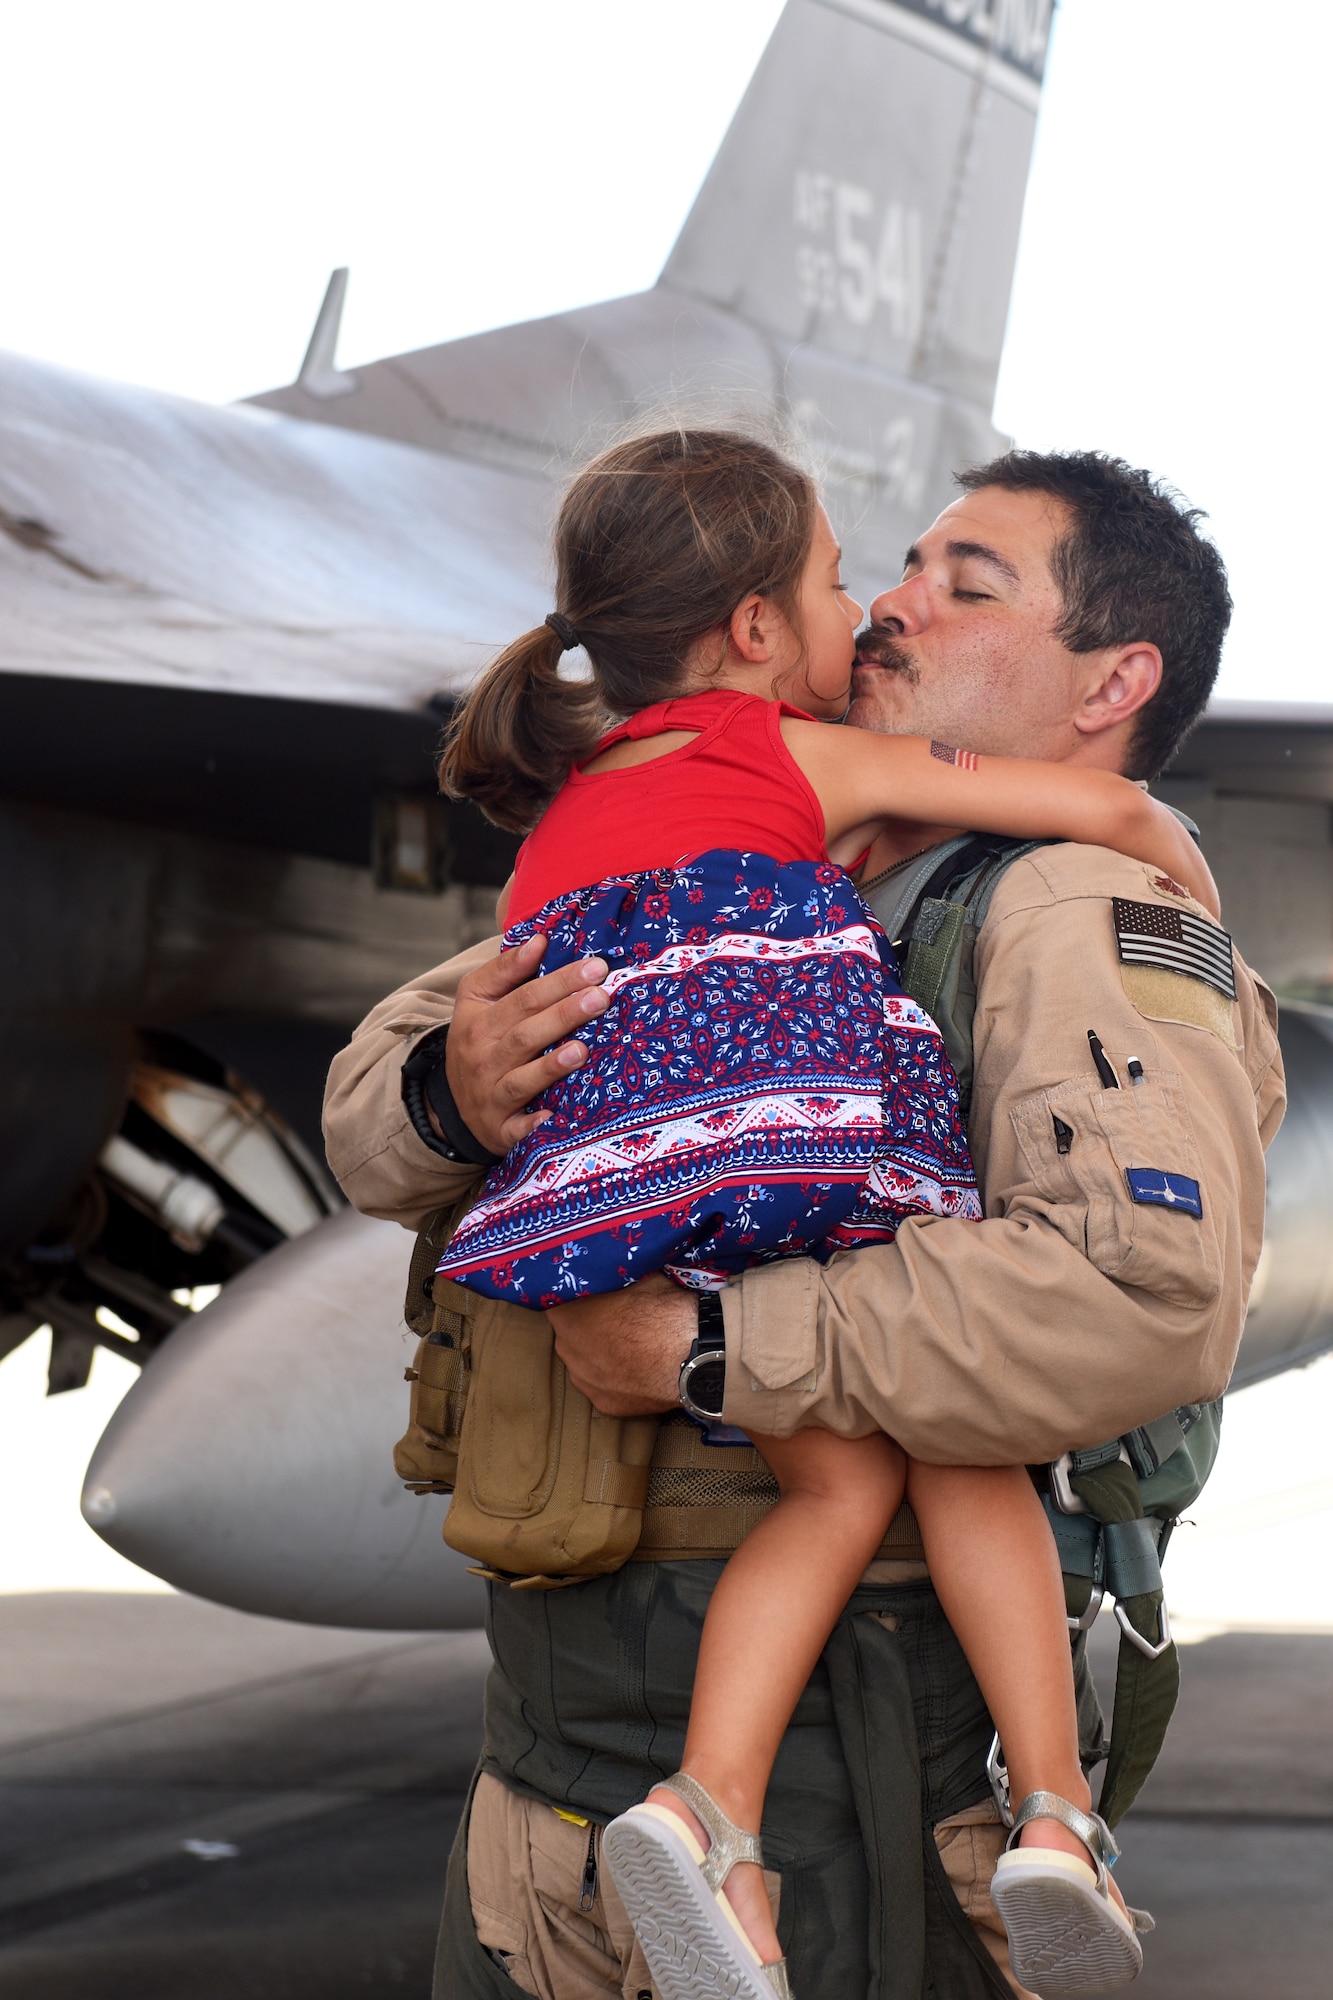 U.S. Air Force Maj. Joshua Rosecrans, a 157th Fighter Squadron pilot, greets his daughter at McEntire Joint National Guard Base, South Carolina, after returning from a deployment to Prince Sultan Air Base, Kingdom of Saudi Arabia, July 16, 2021. “Swamp Fox” Airmen from the South Carolina Air National Guard’s 169th Fighter Wing were deployed to PSAB for the past three months to project combat power and help bolster defensive capabilities against potential threats in the region. (U.S. Air National Guard photo by Senior Airman Mackenzie Bacalzo, 169th Fighter Wing Public Affairs)